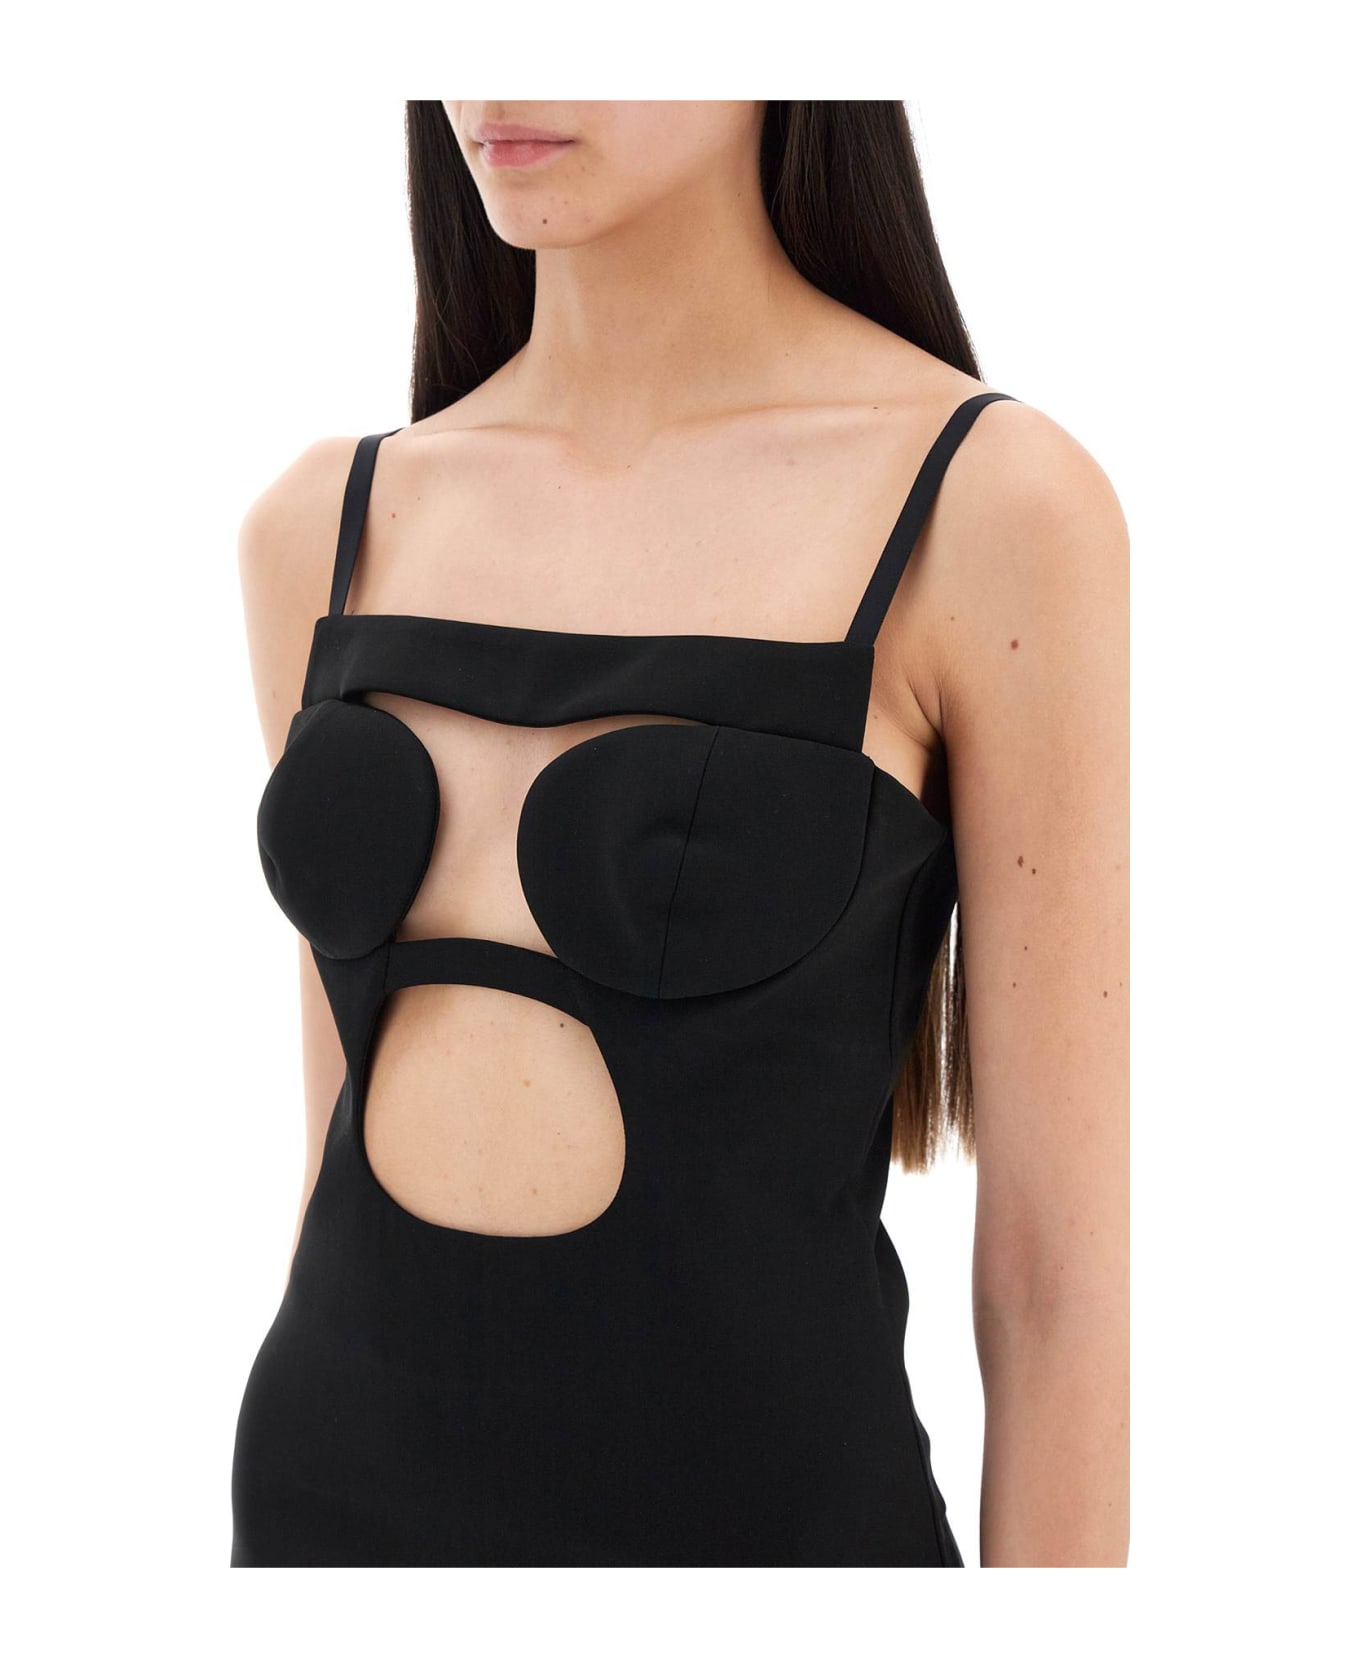 Nensi Dojaka Cut-out Top With Padded Cup - BLACK (Black) トップス